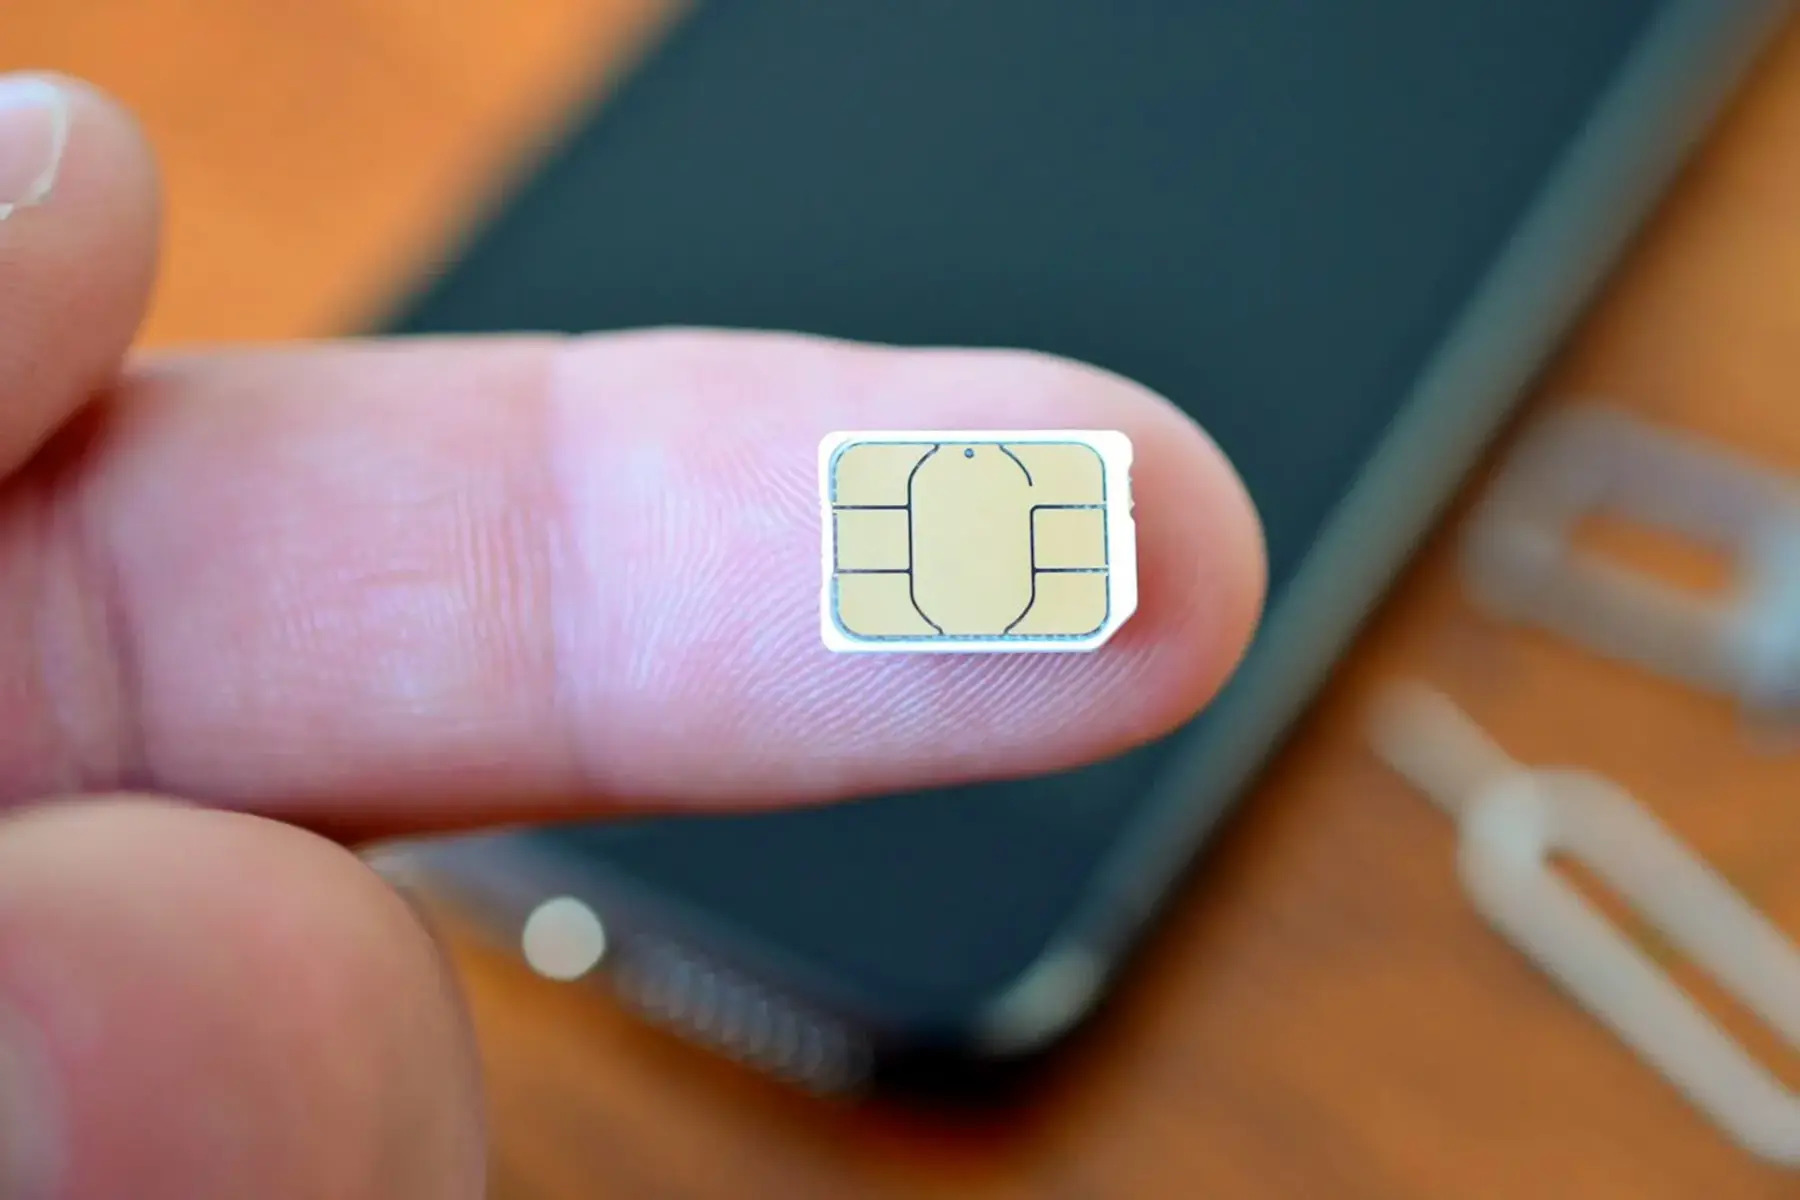 How To Unlock A Phone From Any Carrier